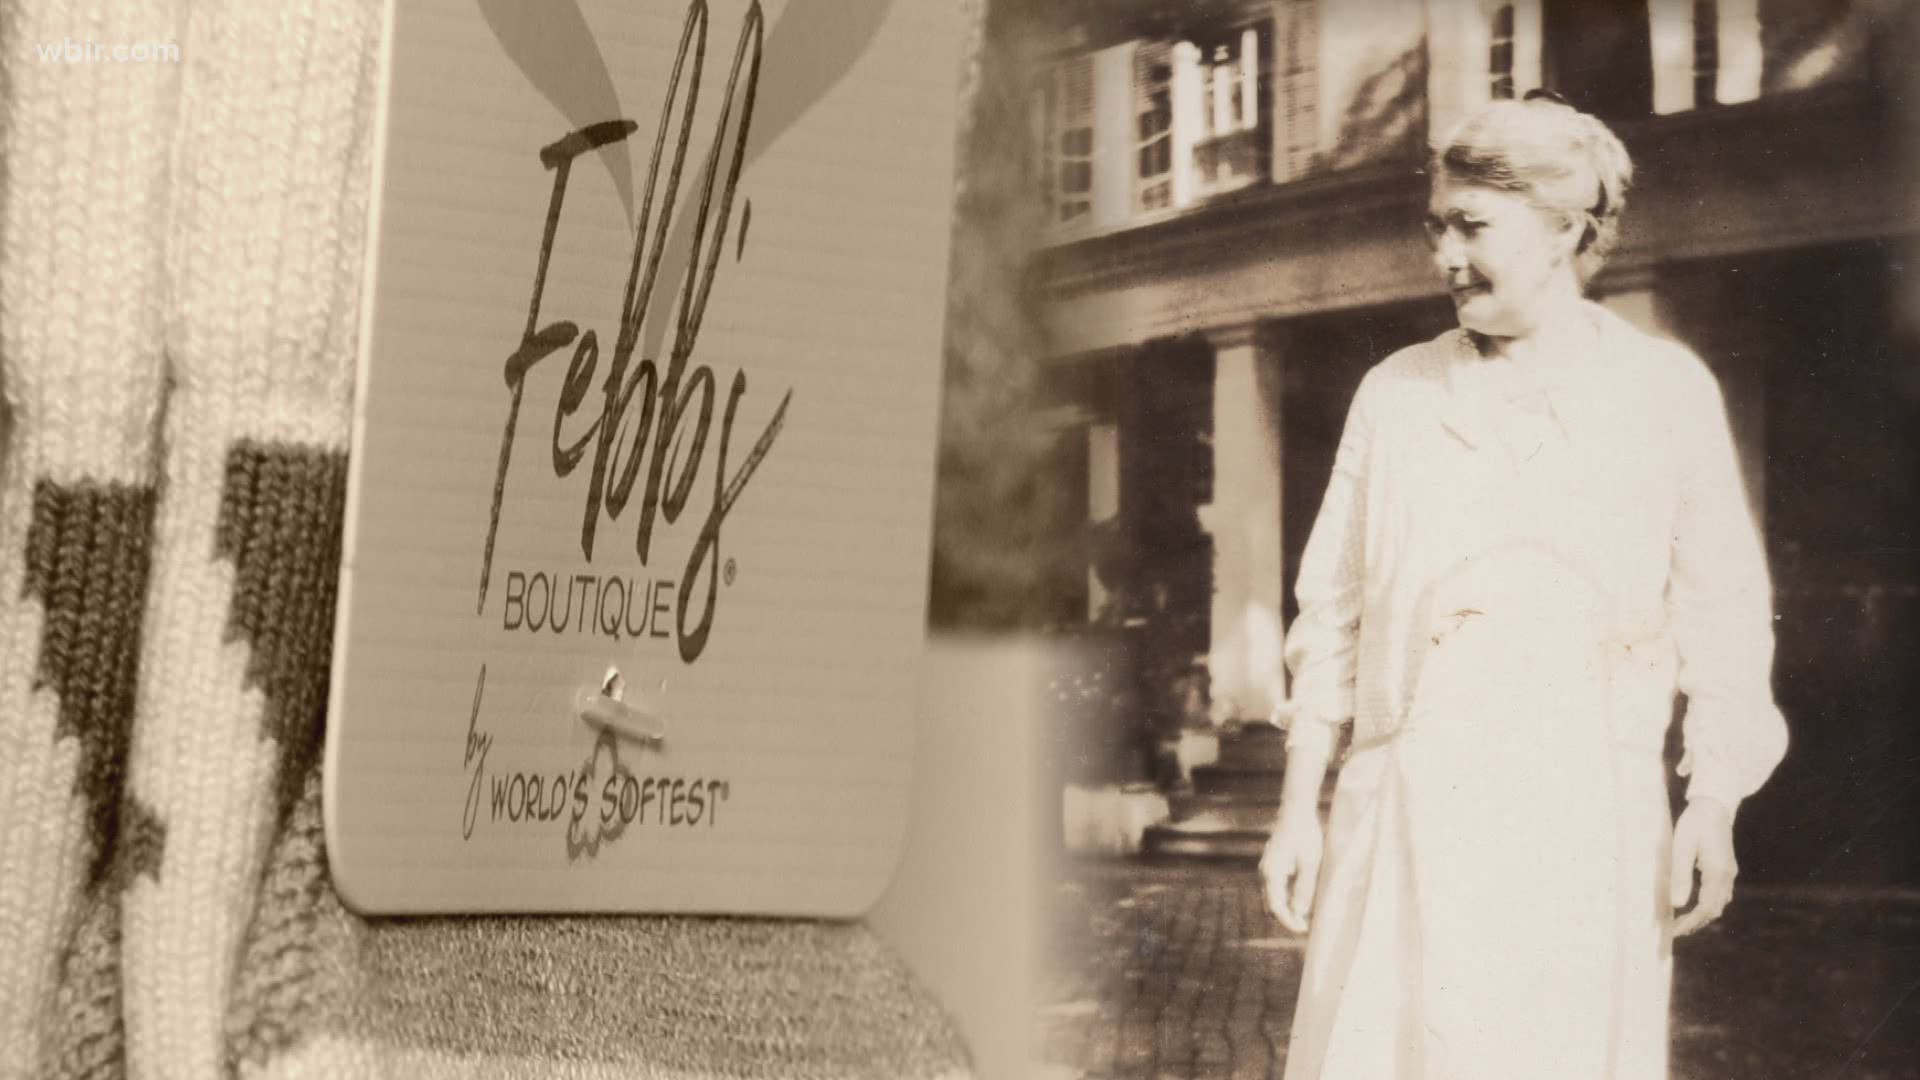 In a letter, Febb successfully convinced her son, TN State Rep. Harry Burn, to "Hurrah and vote for suffrage" in 1920. Febb's Boutique is a tribute to this legacy.